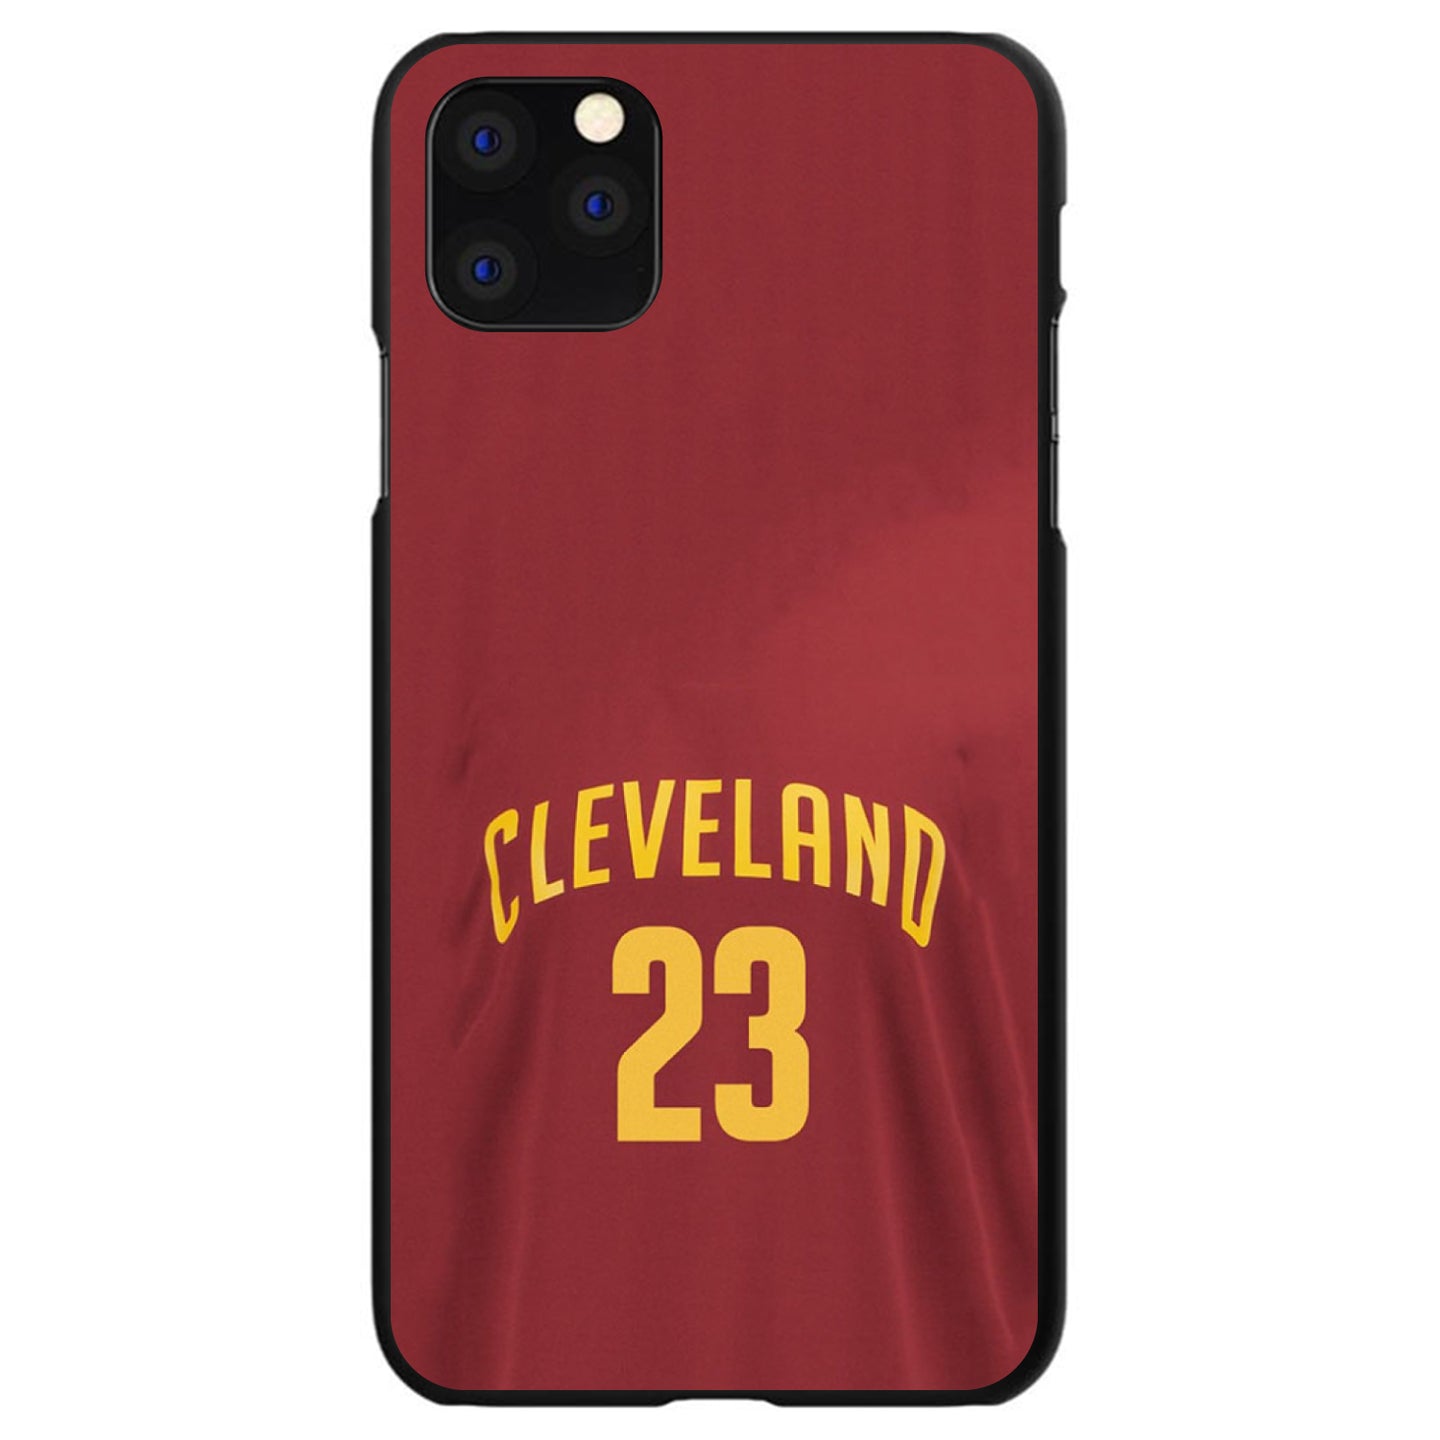 DistinctInk® Hard Plastic Snap-On Case for Apple iPhone or Samsung Galaxy - Cleveland 23 Jersey